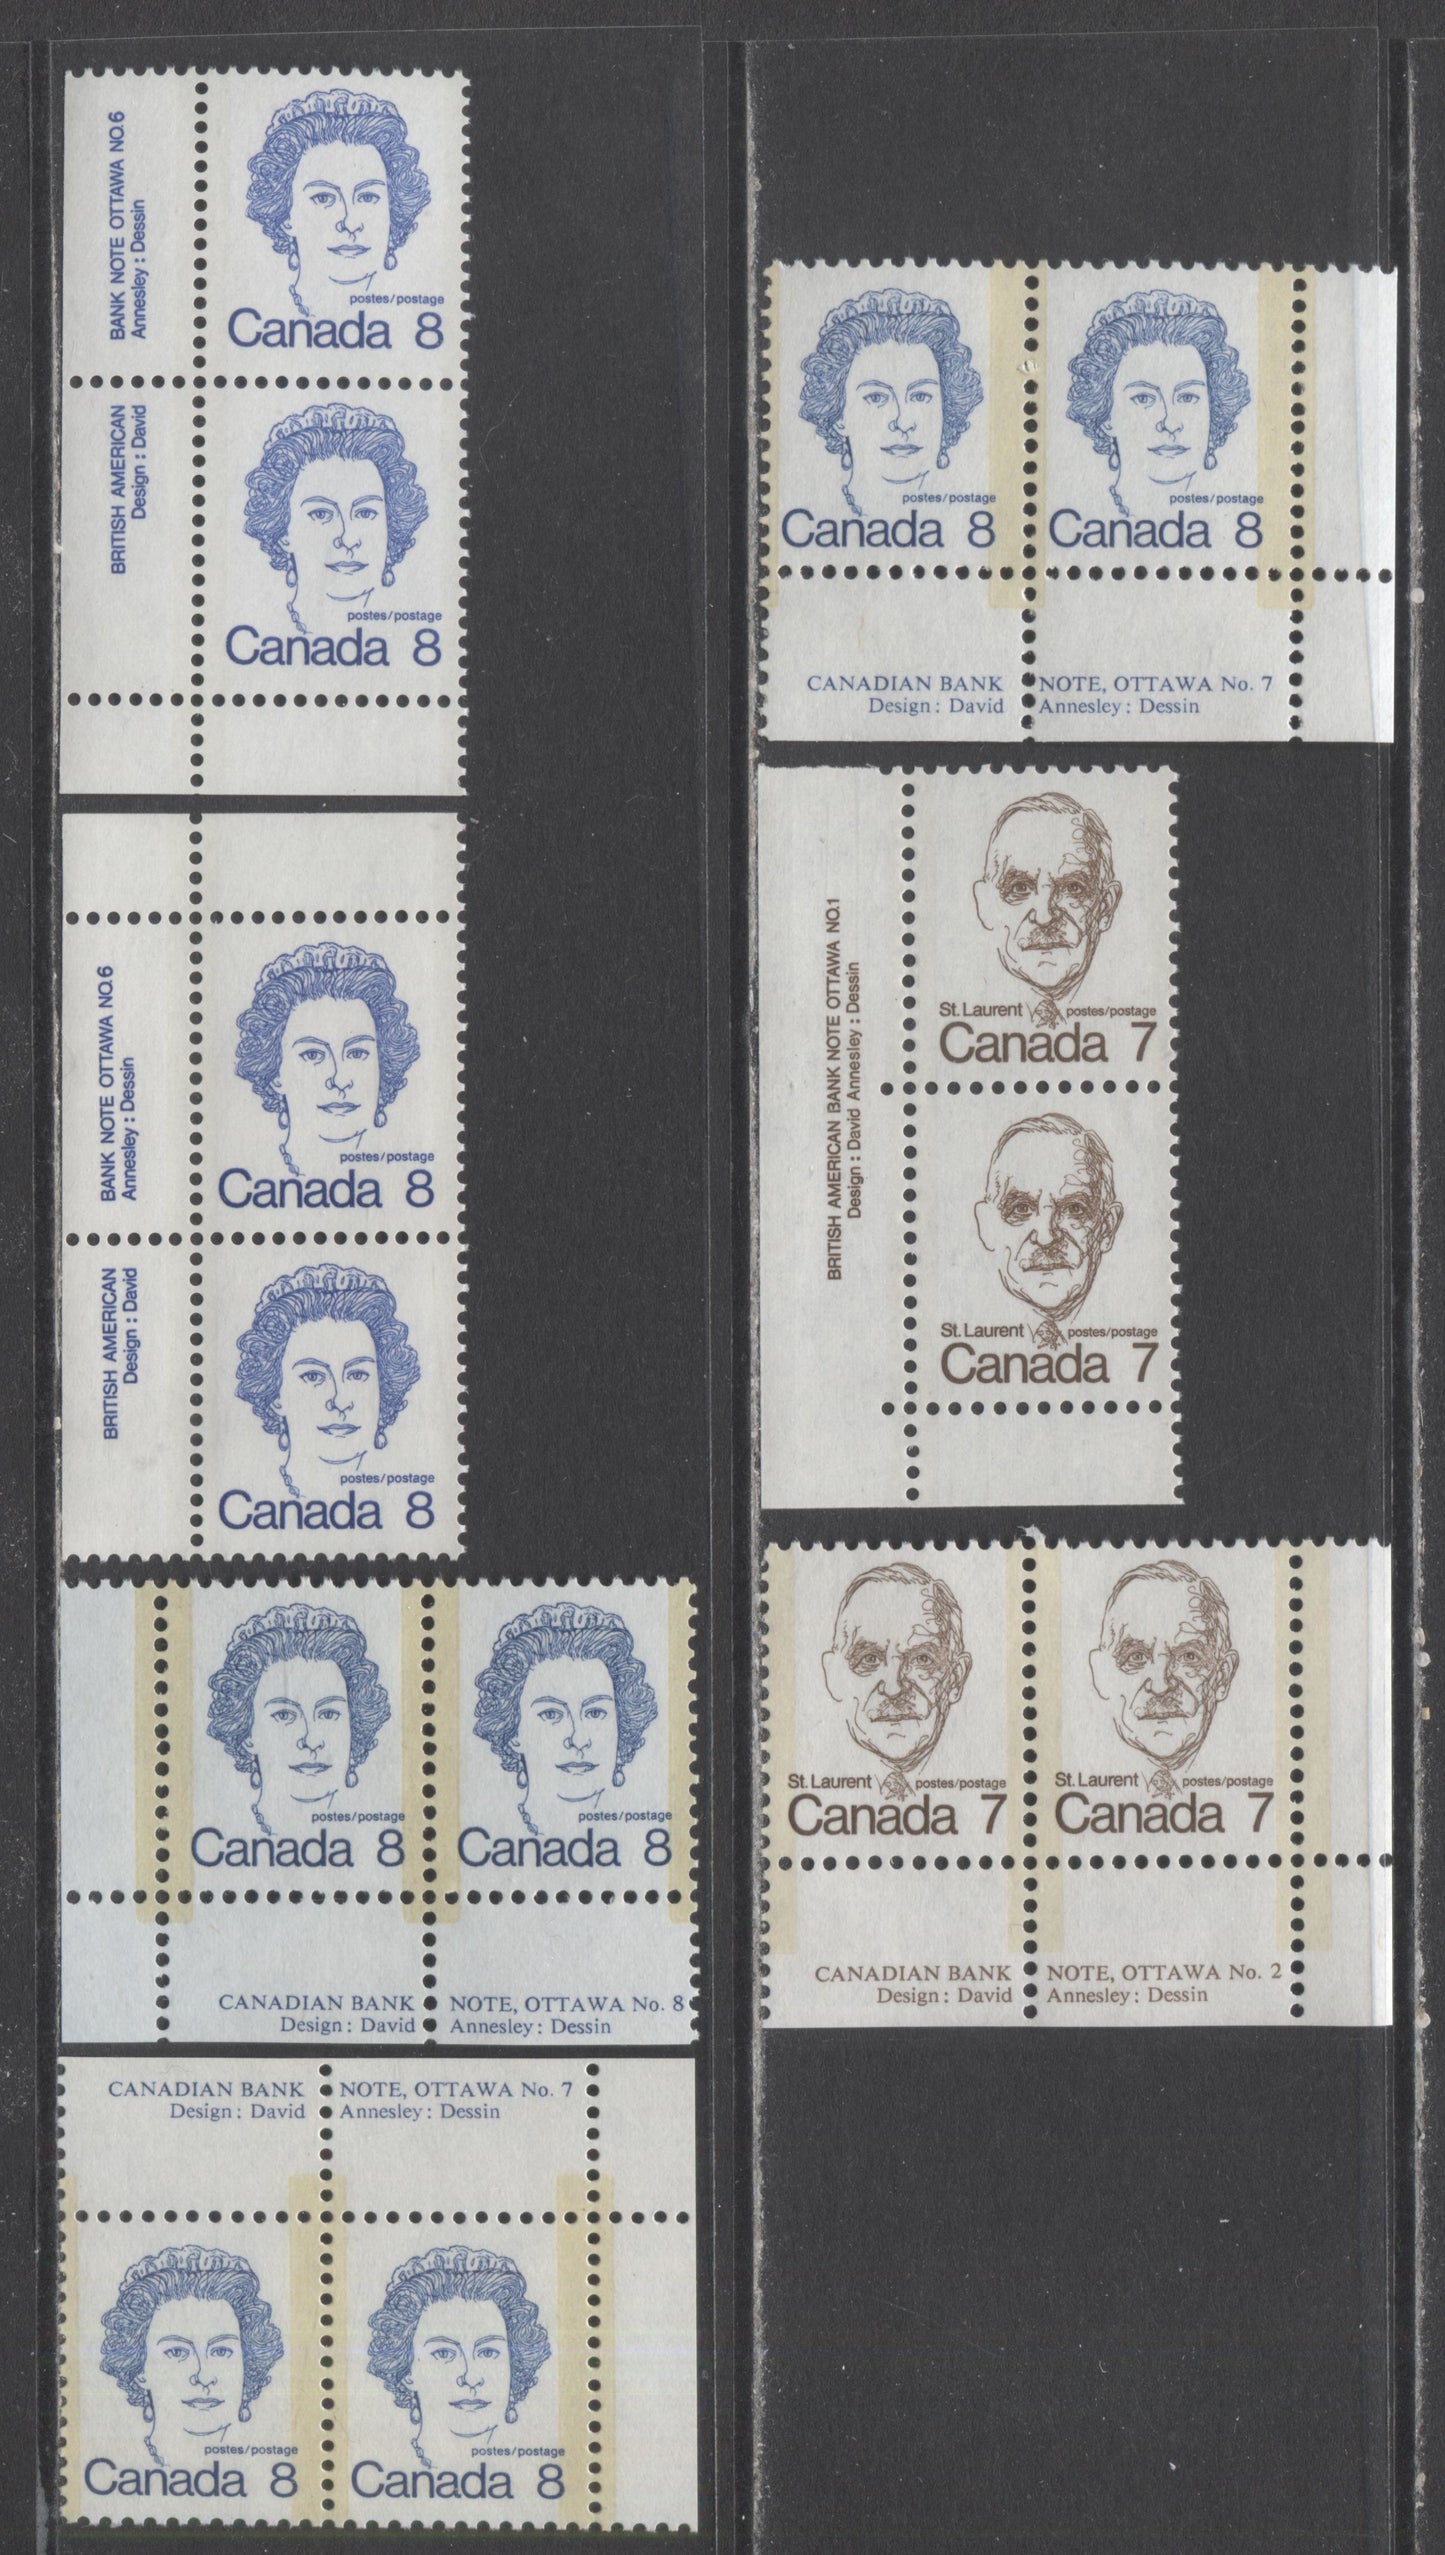 Lot 320 Canada #592, 592iii, 593vii, 593viii, 593b, 593bi 7c,8c Dark Brown, Royal Blue St. Laurent, Queen Elizabeth II, 1973 - 1976 Caricature Issue, 7 VFNH Plate Pairs With Various Papers And Tagging